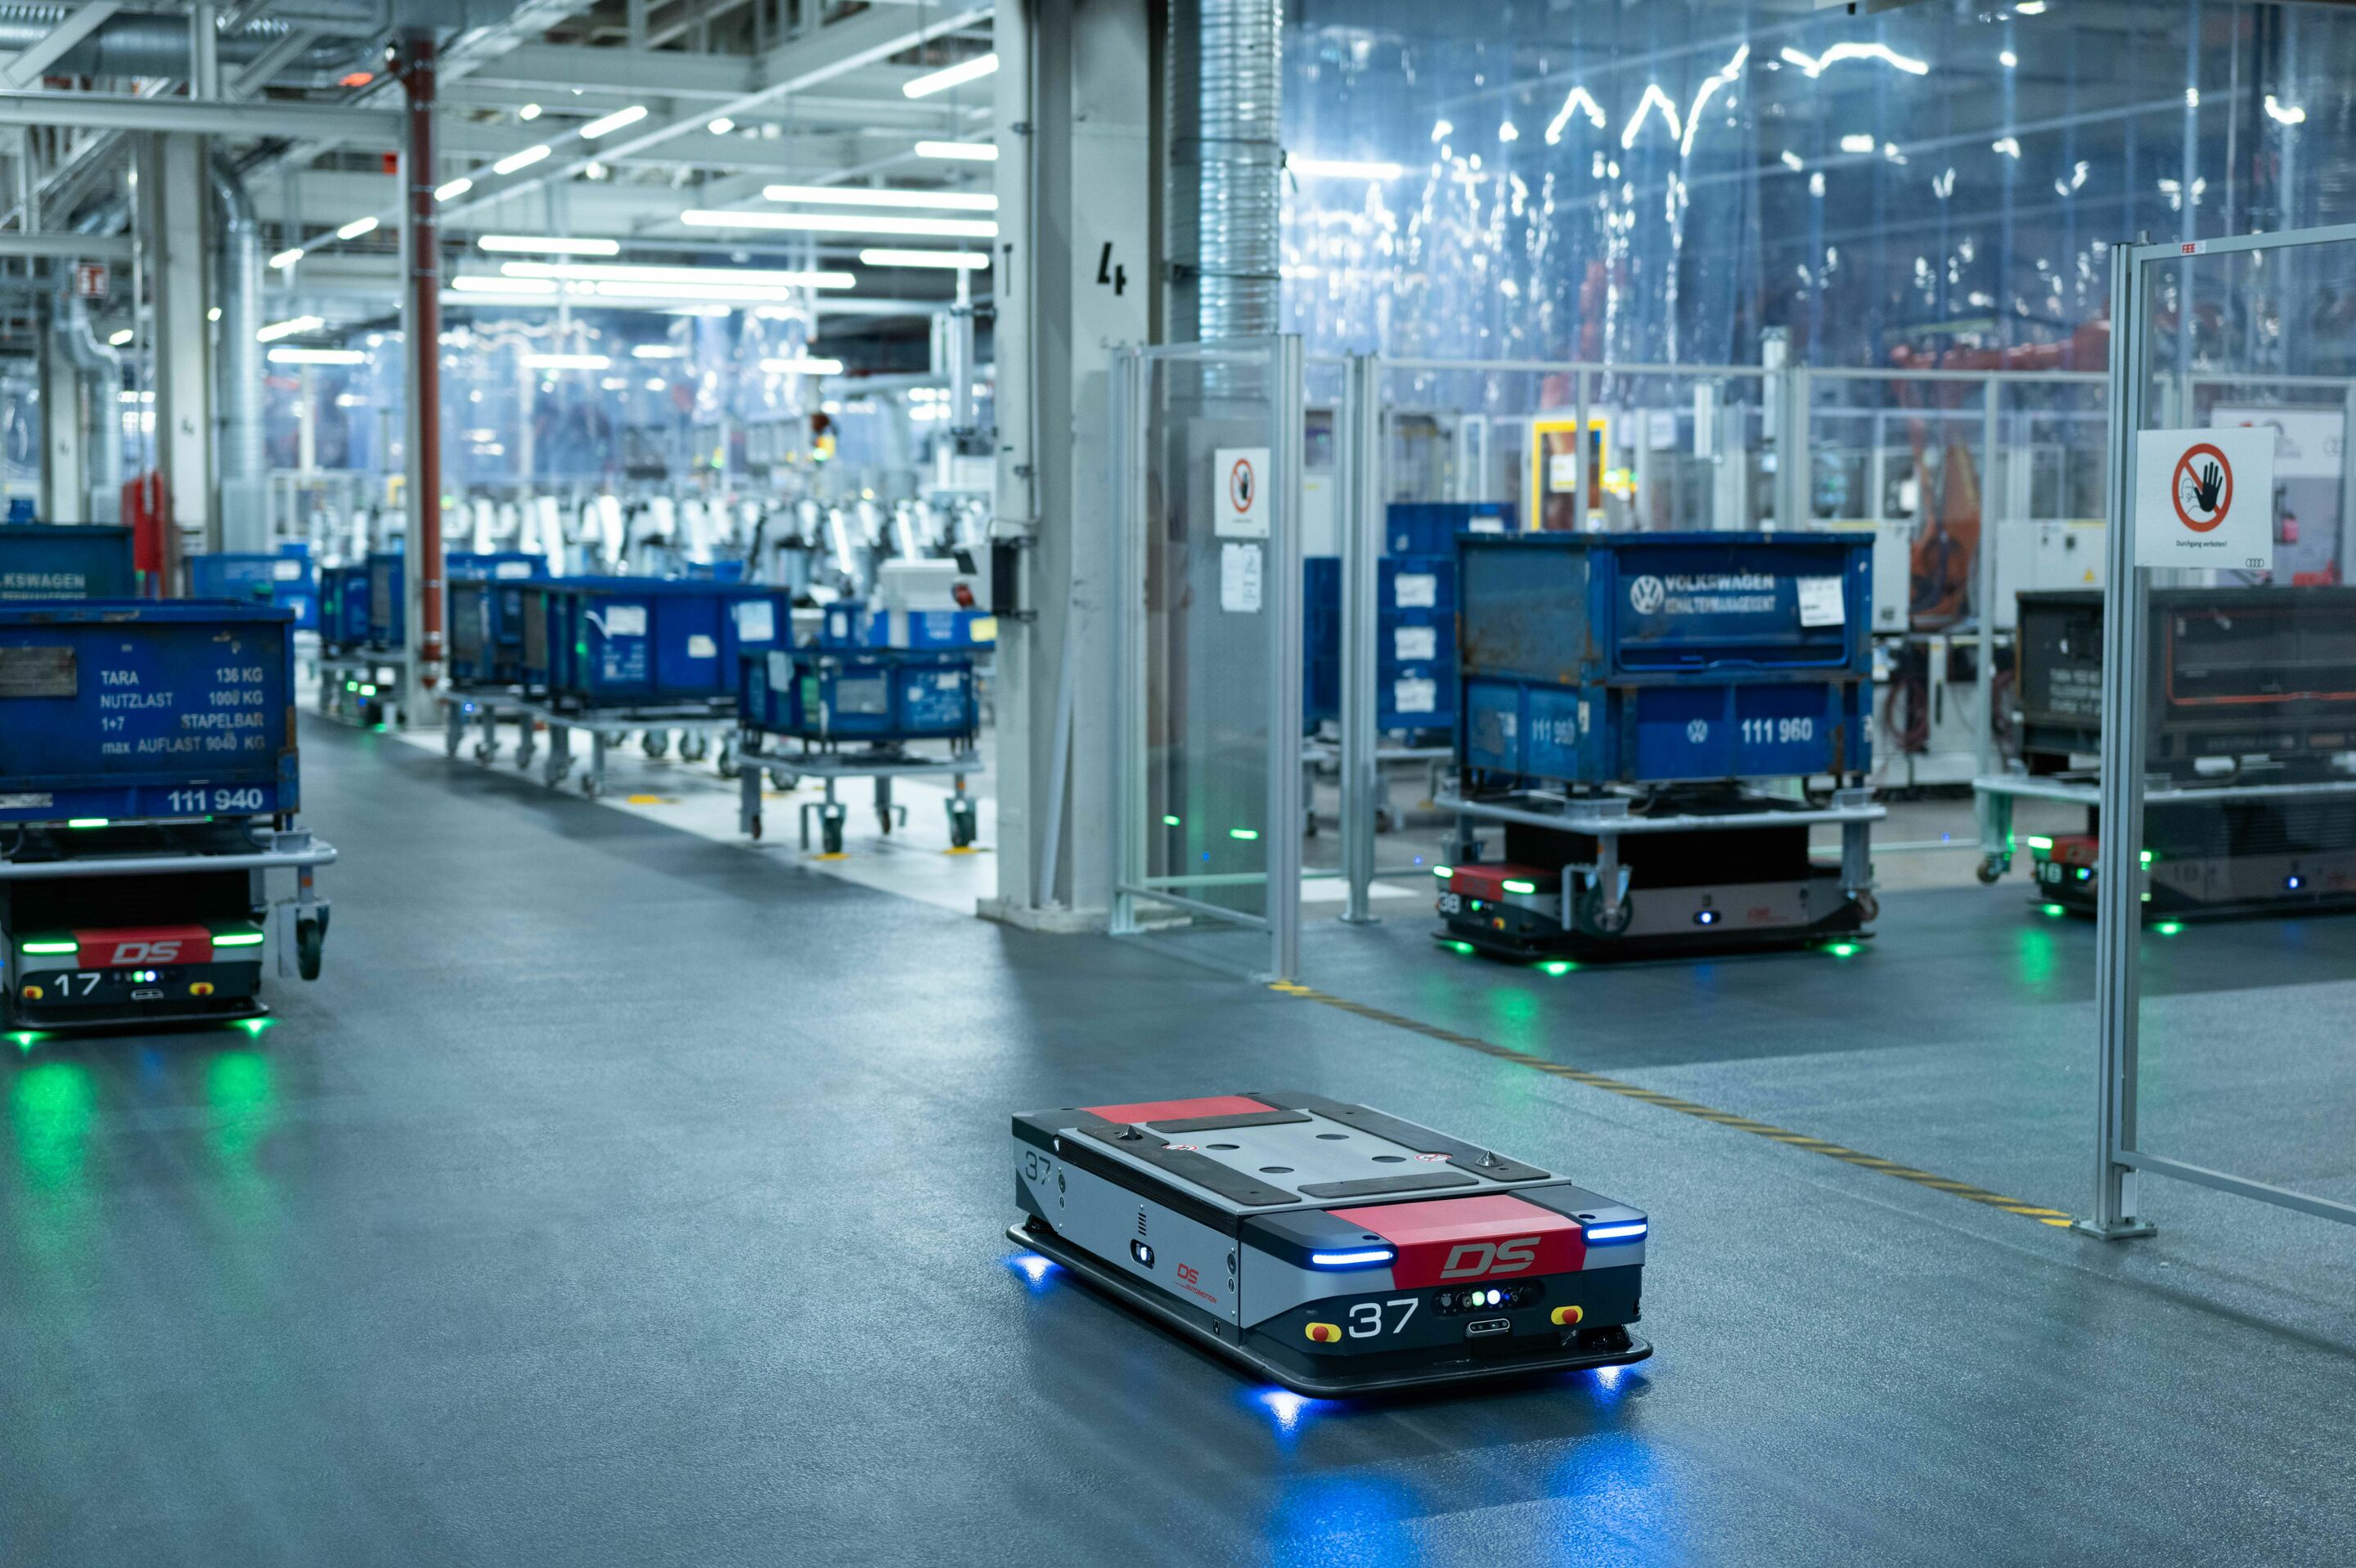 Audi A5 production at the Neckarsulm site